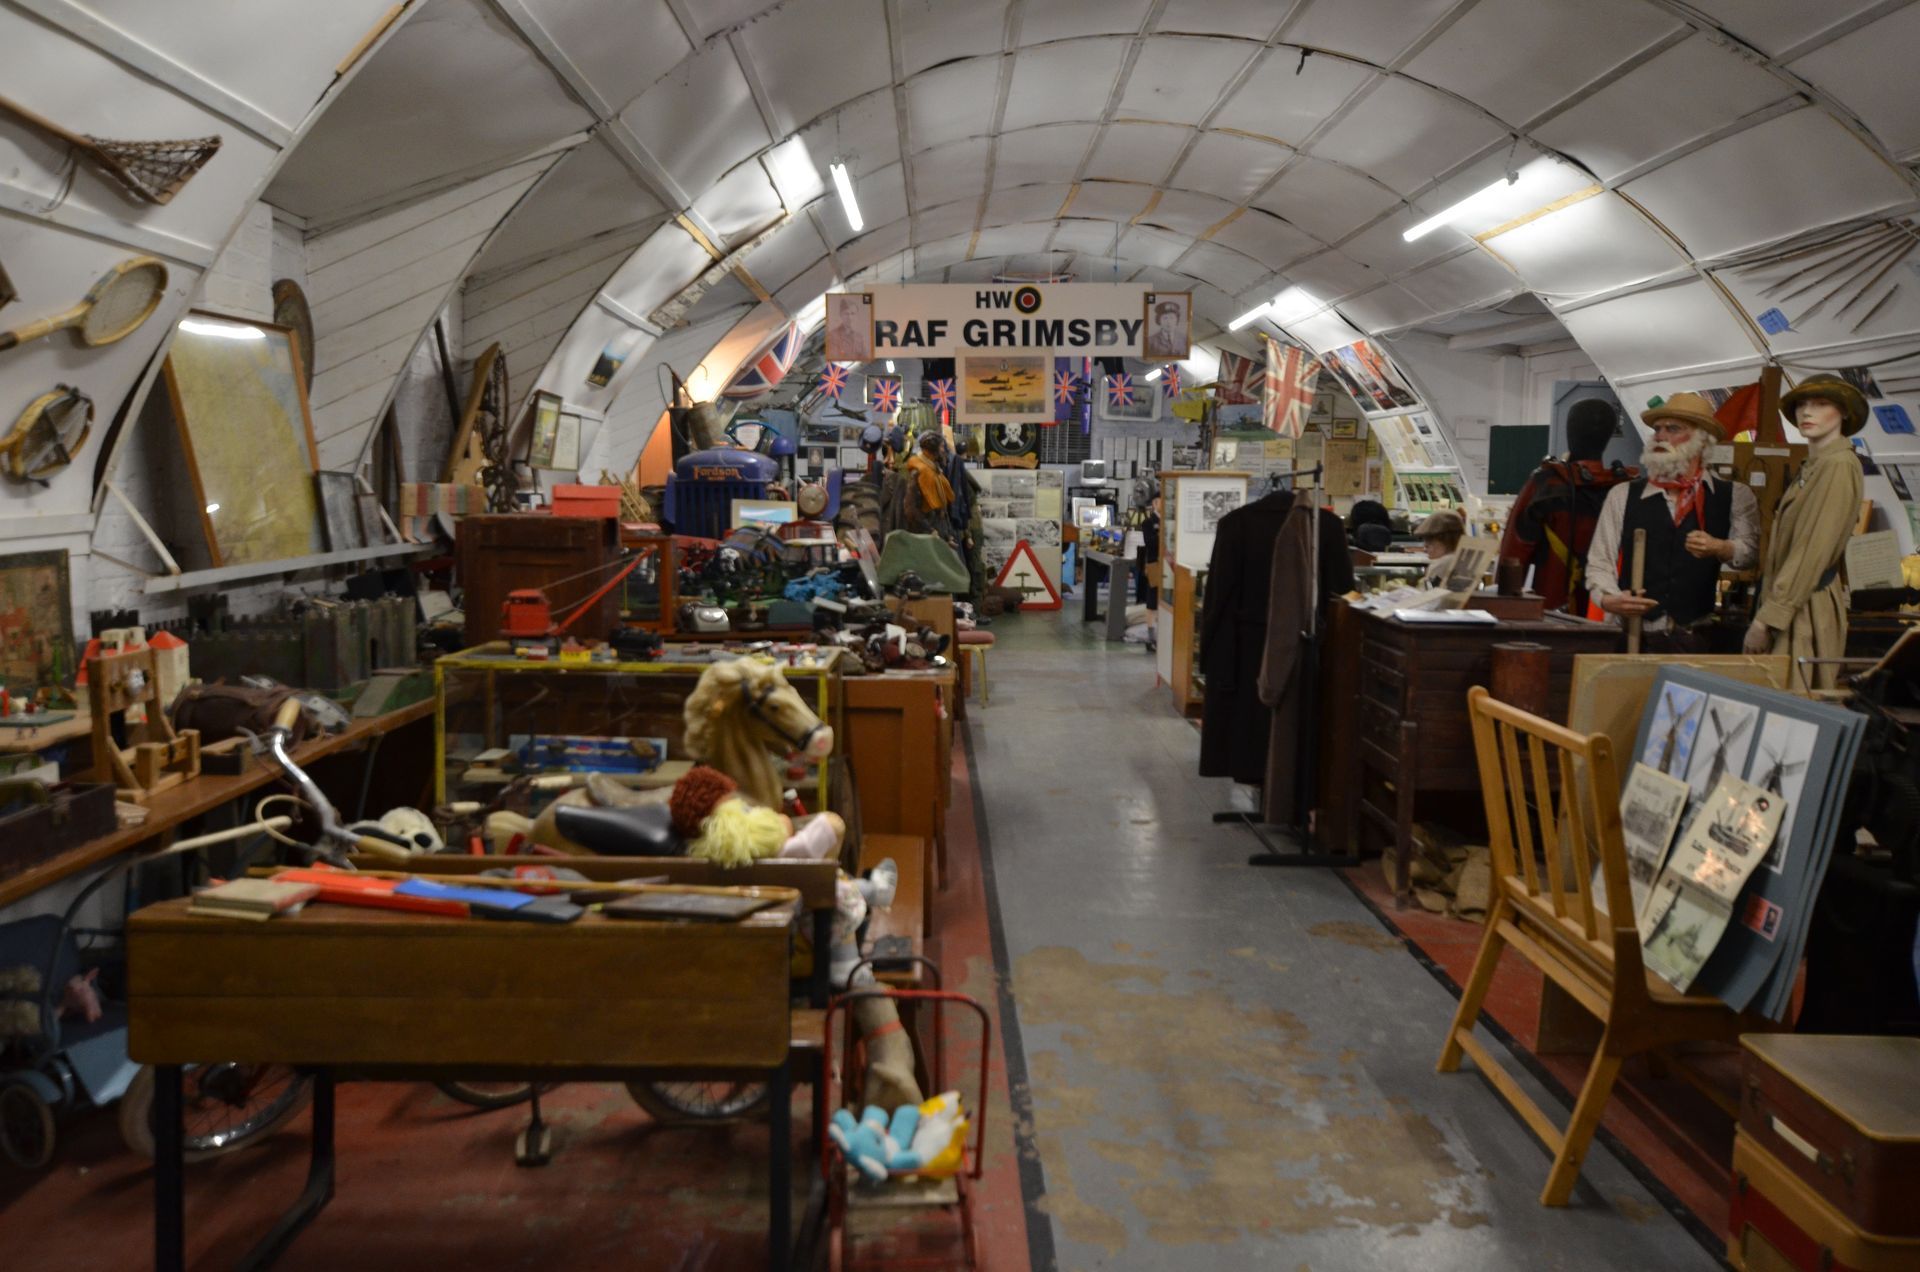 A room filled with lots of objects and a sign that says raf grimsby